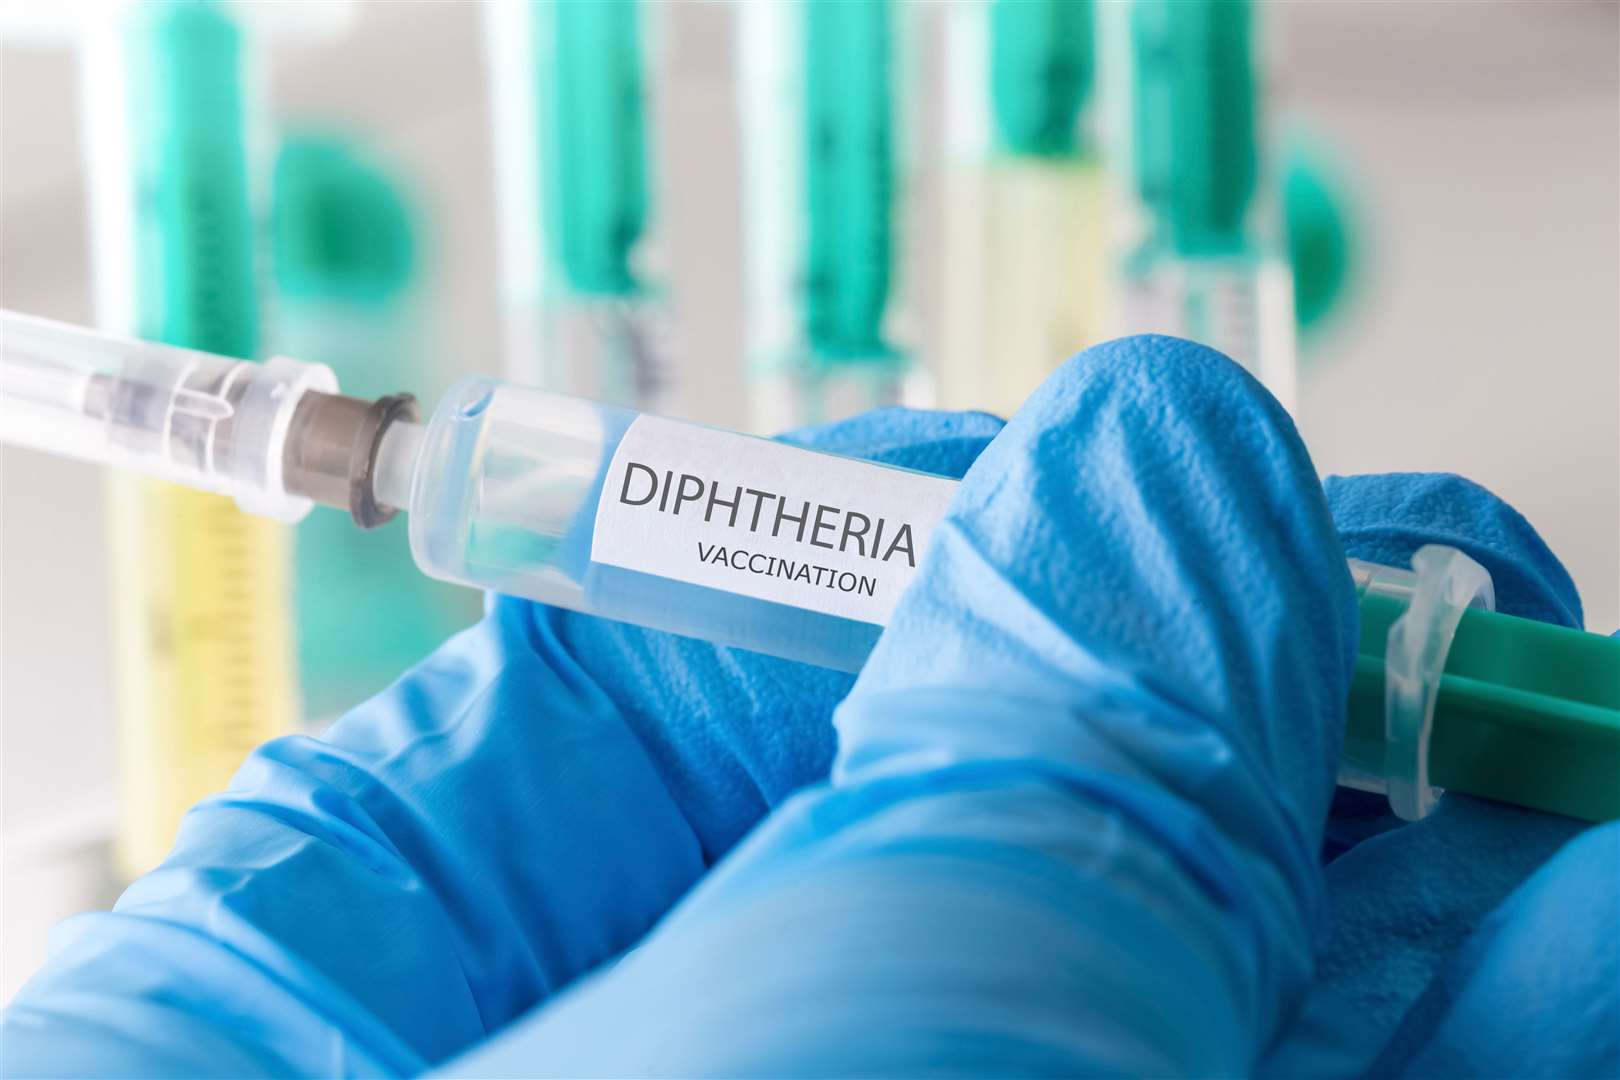 You can prevent diptheria with vaccination. Image: Stock photo.